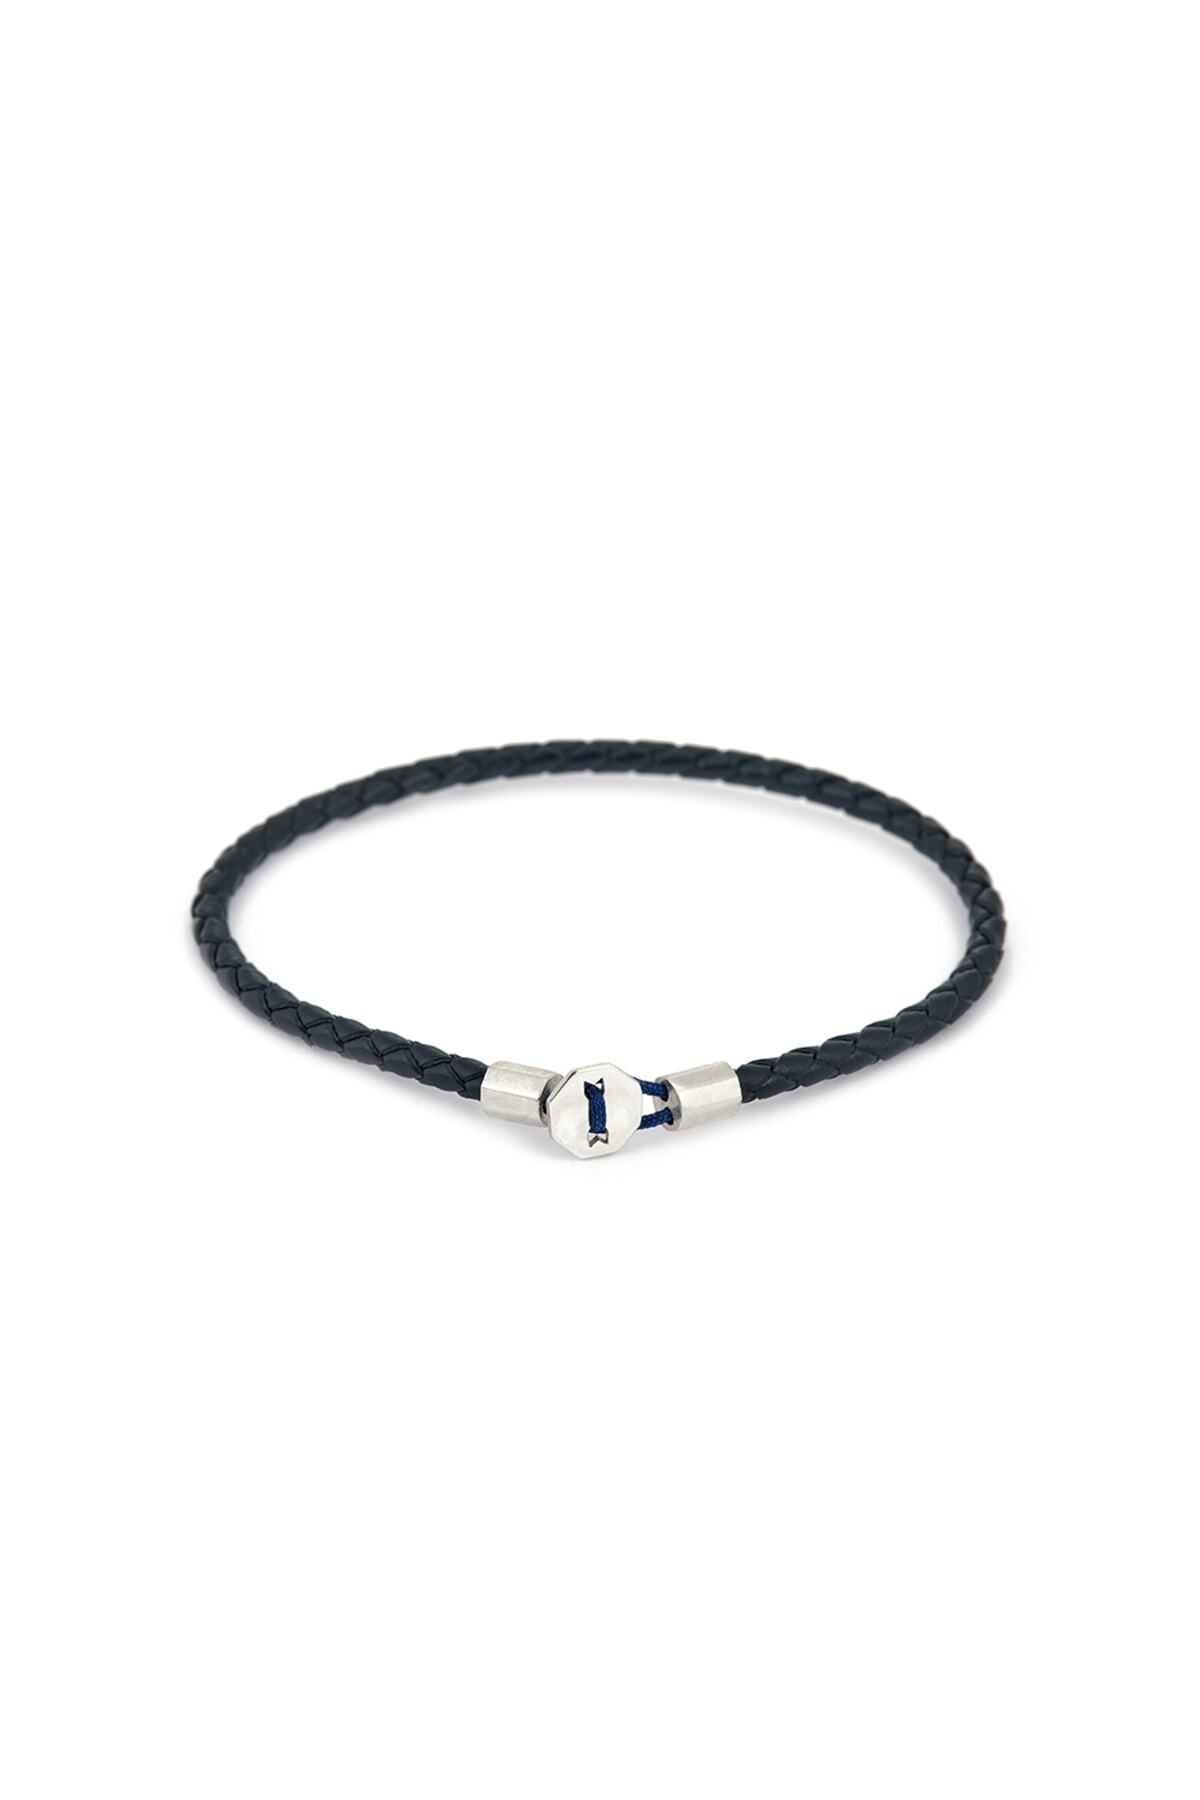 Atolyewolf Navy Blue Leather Chance Bracelet In Silver